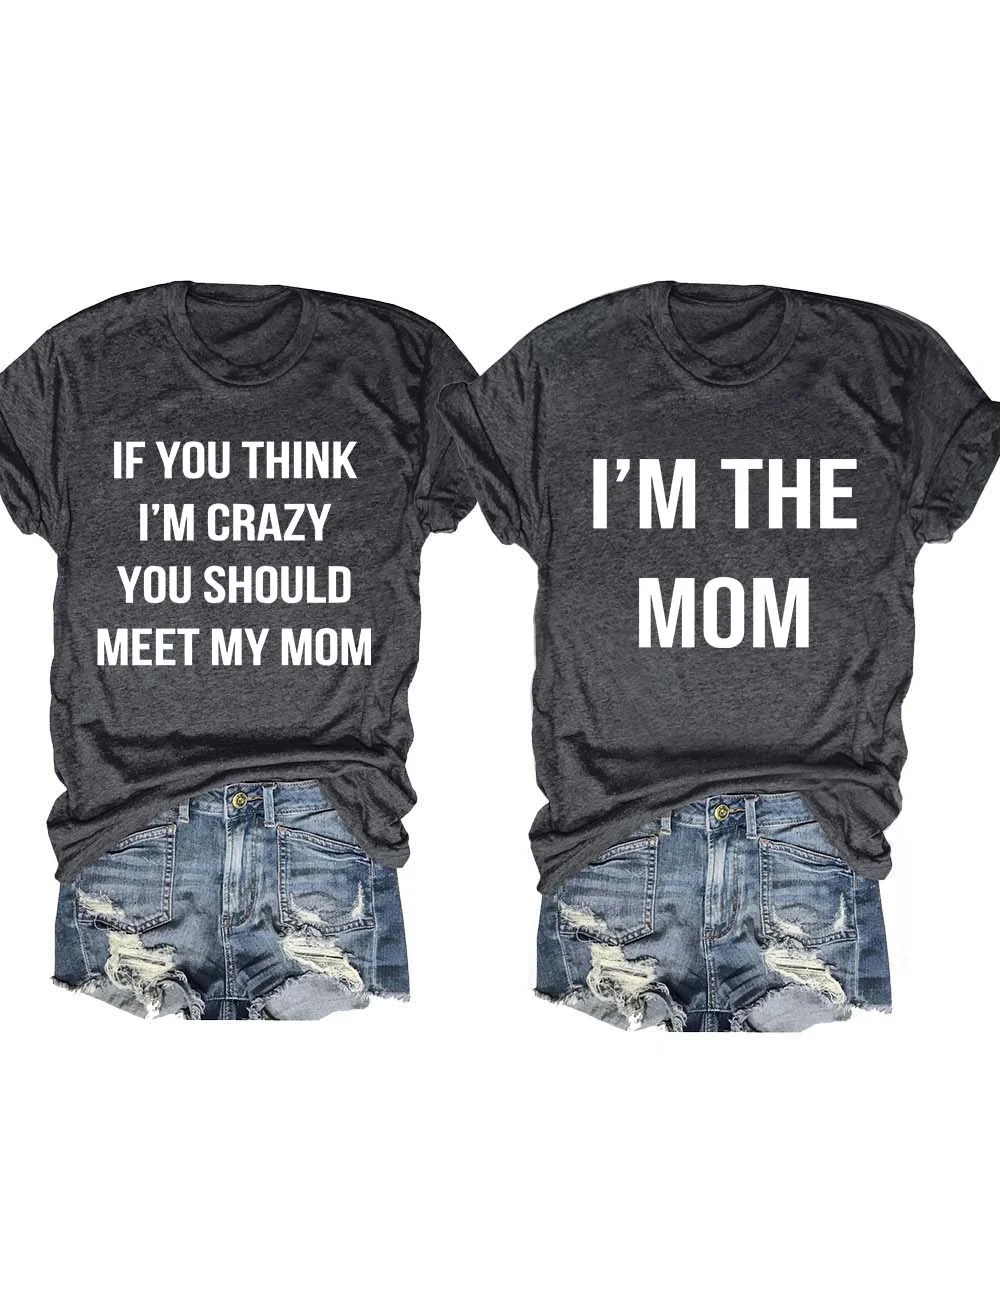 If You think I'm Crazy You Should Meet My Mom T-Shirt